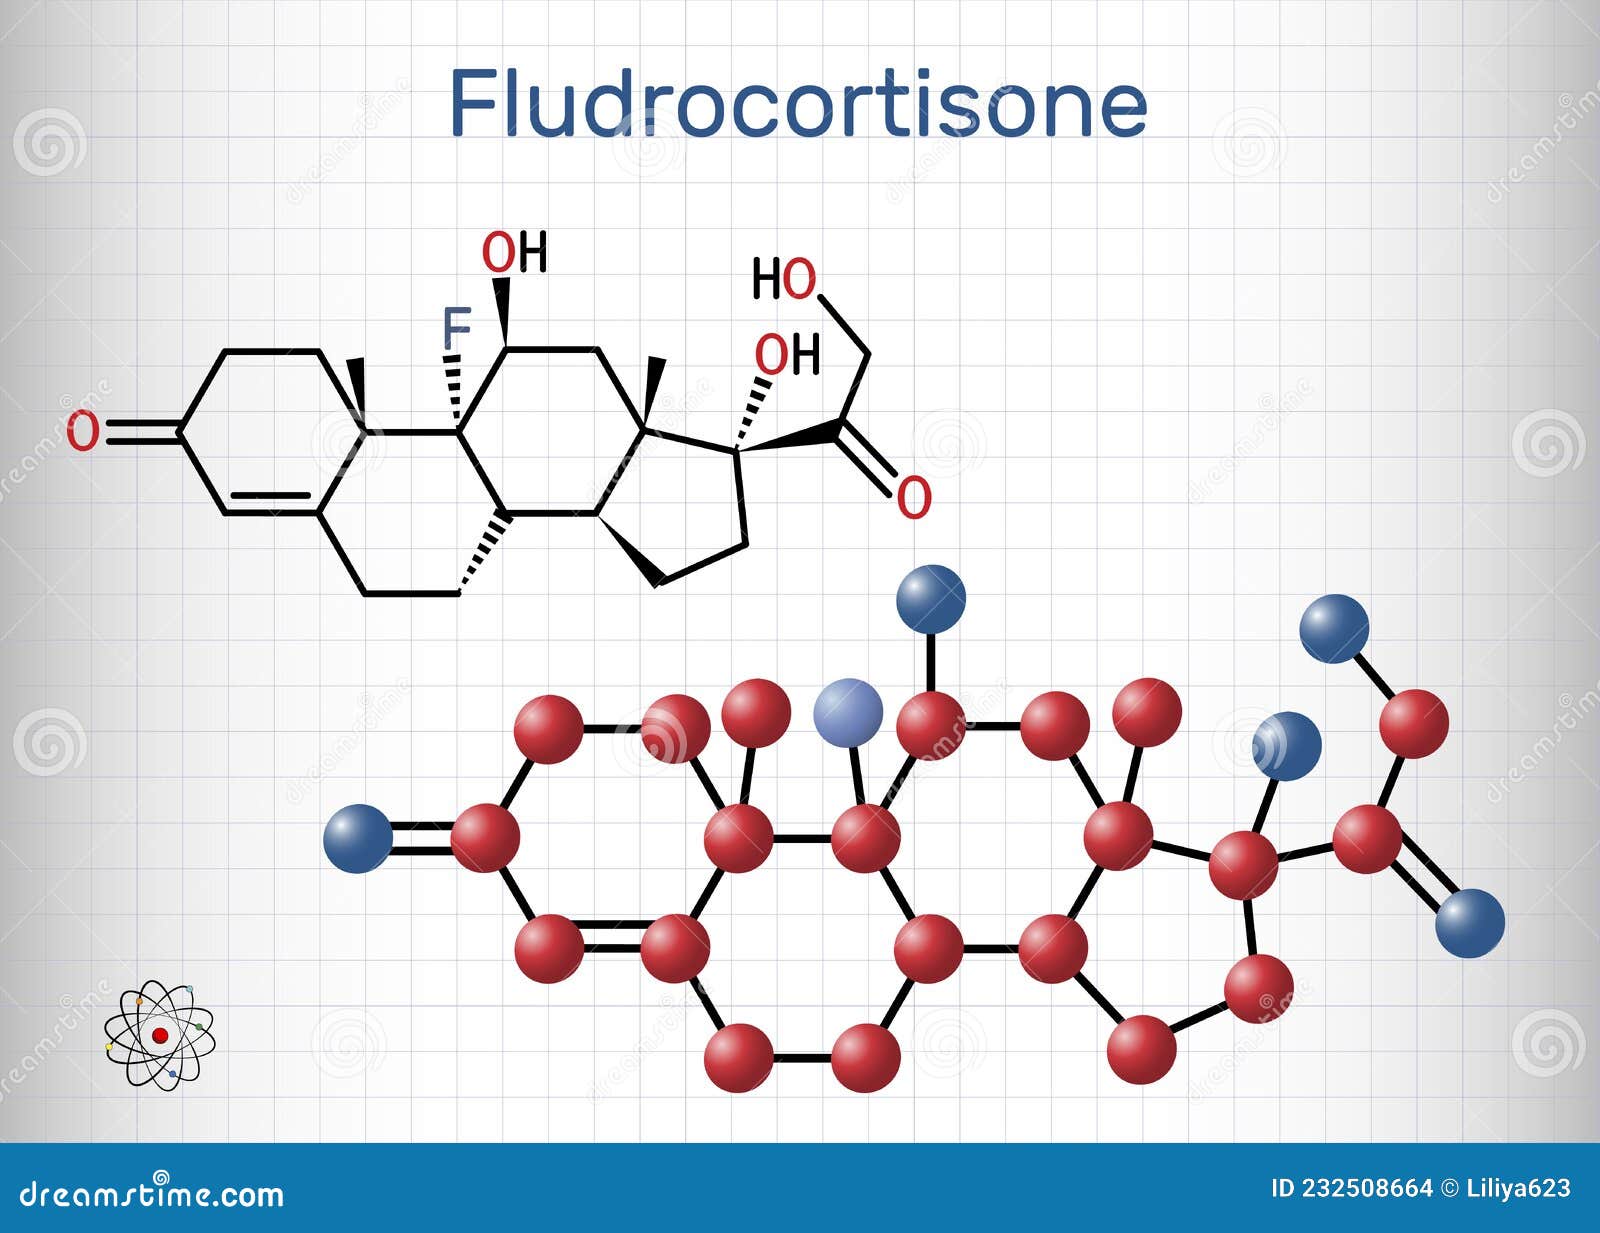 fludrocortison, fluorocortisone molecule. it is synthetic corticosteroid with antiinflammatory and antiallergic properties.